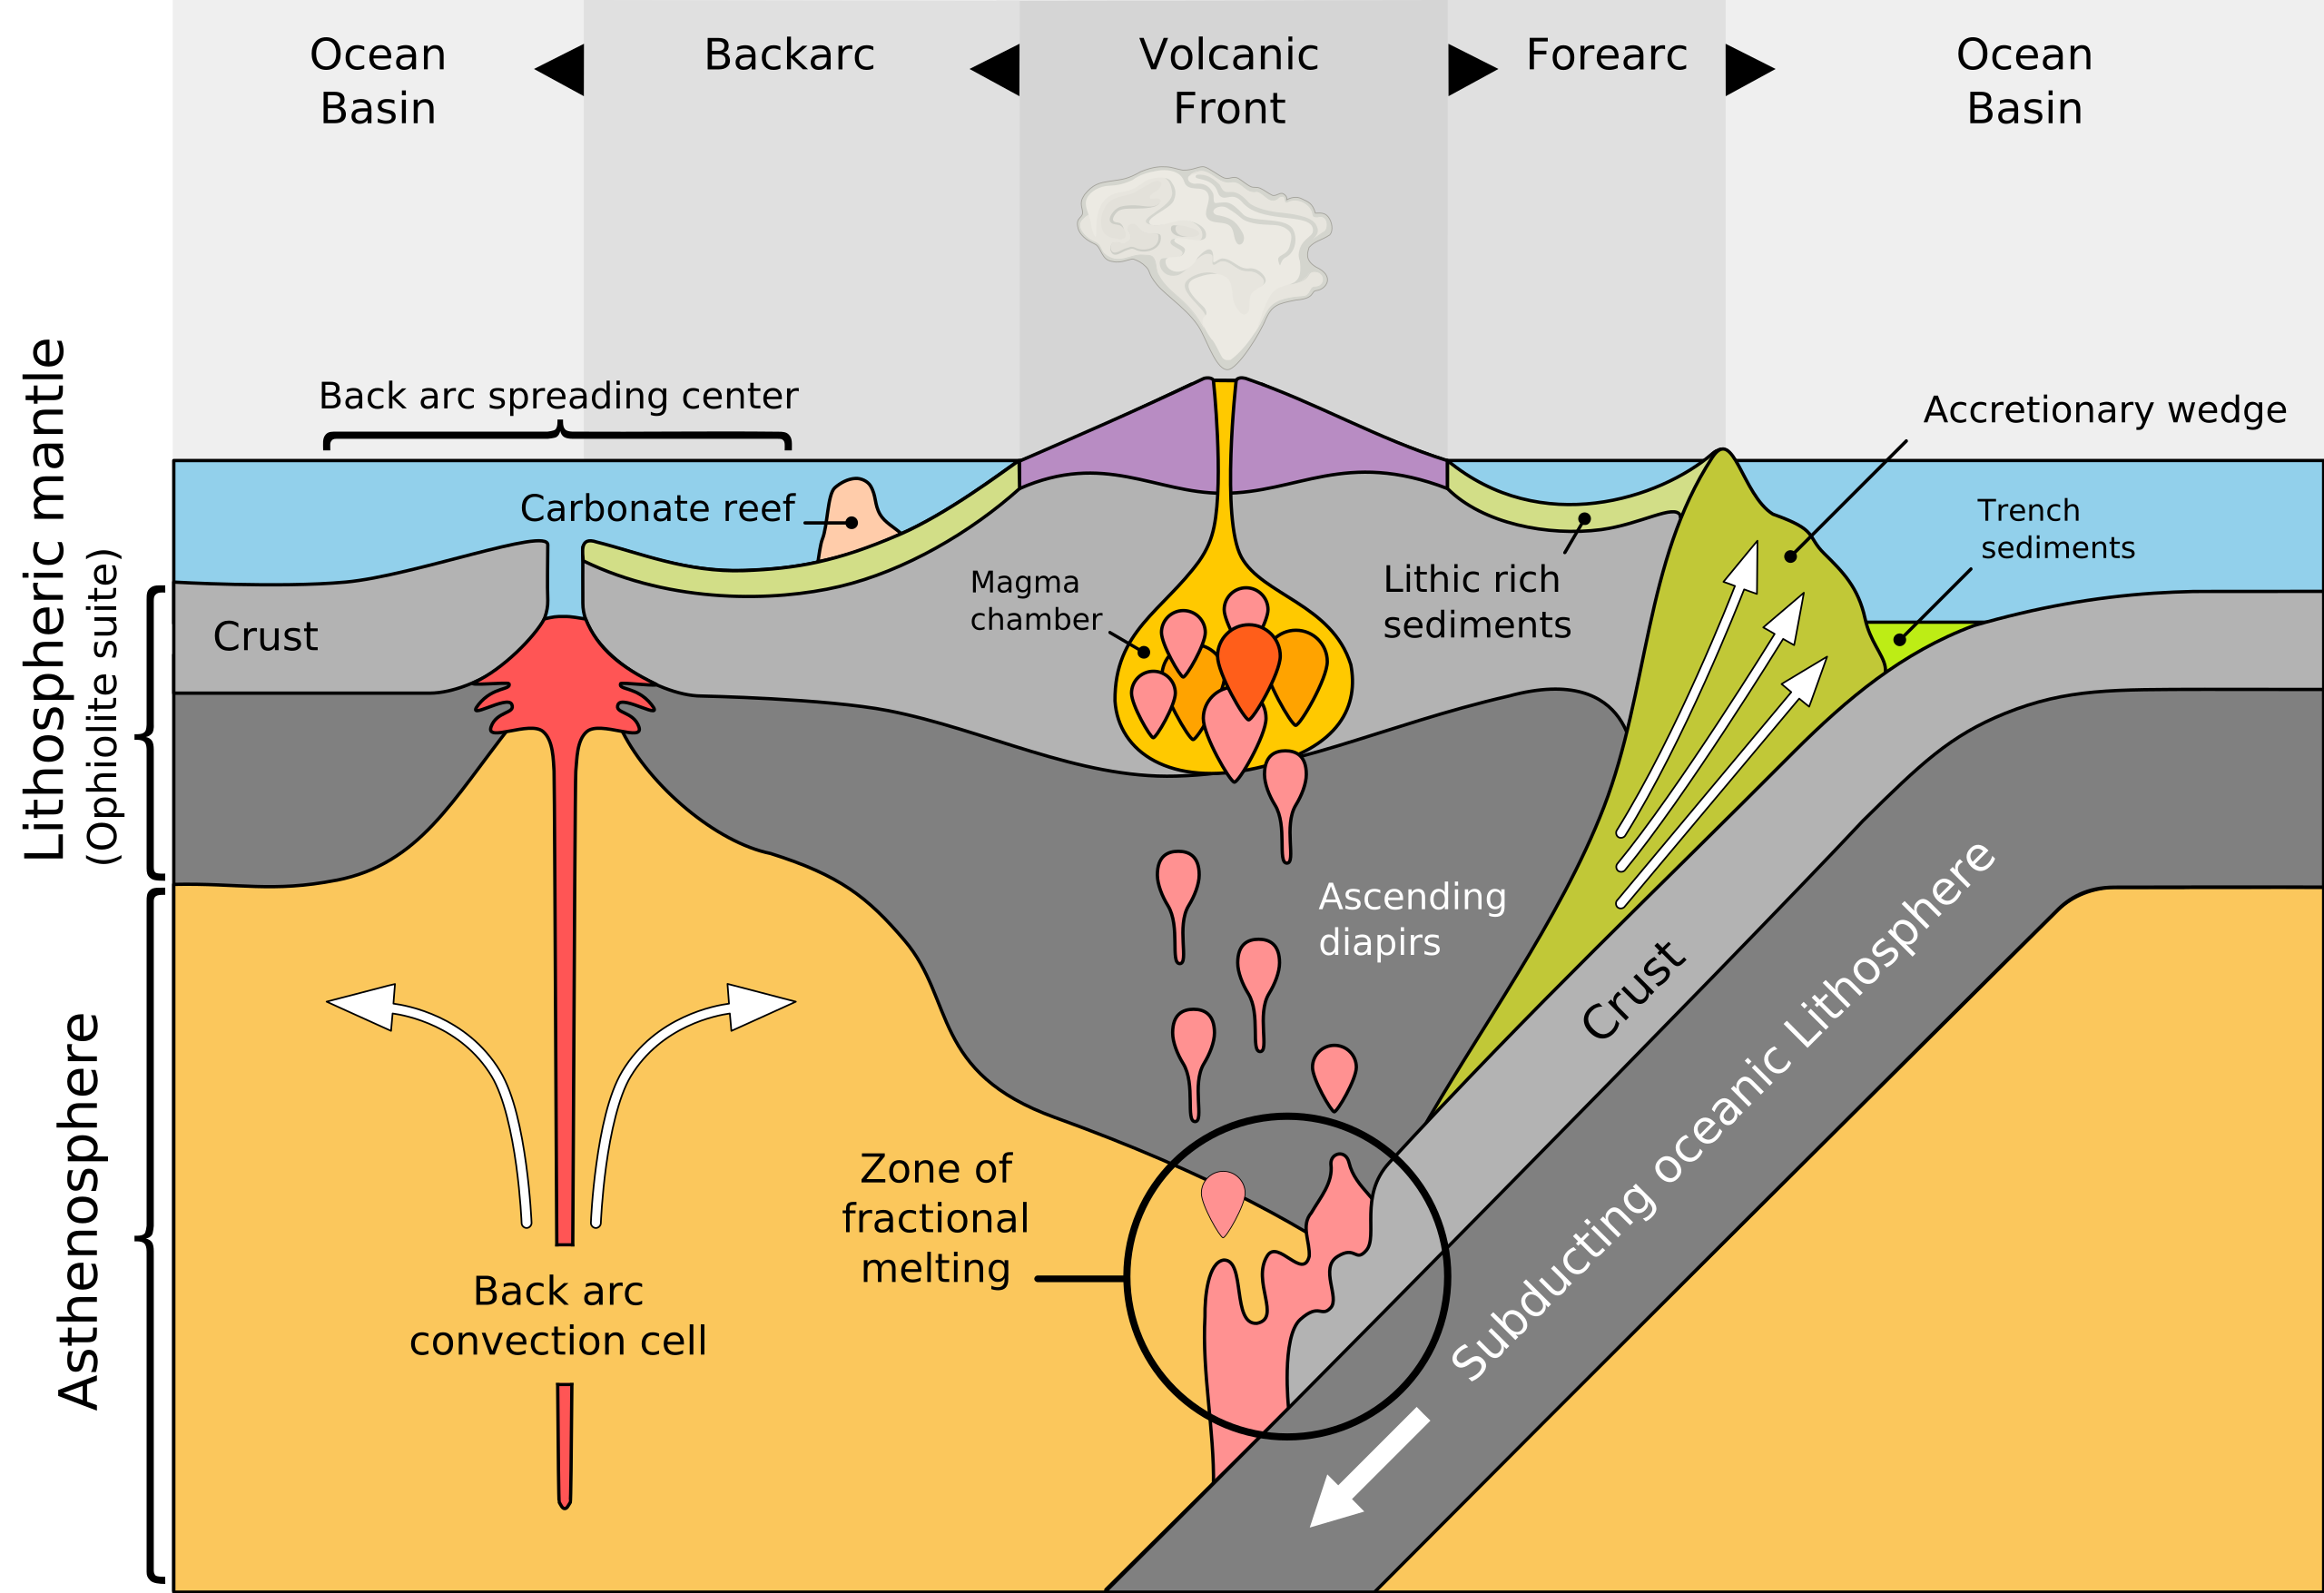 Cross section schematic showing oceanic crust subducting beneath another tectonic plate. Above the contact between the two plates, there is an ocean trench and accretionary prism. There is a volcanic front on top of the overriding plate which makes up a microcontinent, above where the oceanic crust has subducted beneath it. Ascending diapirs are labeled below the volcanic front. There are ocean basins on either side of the microcontinent.